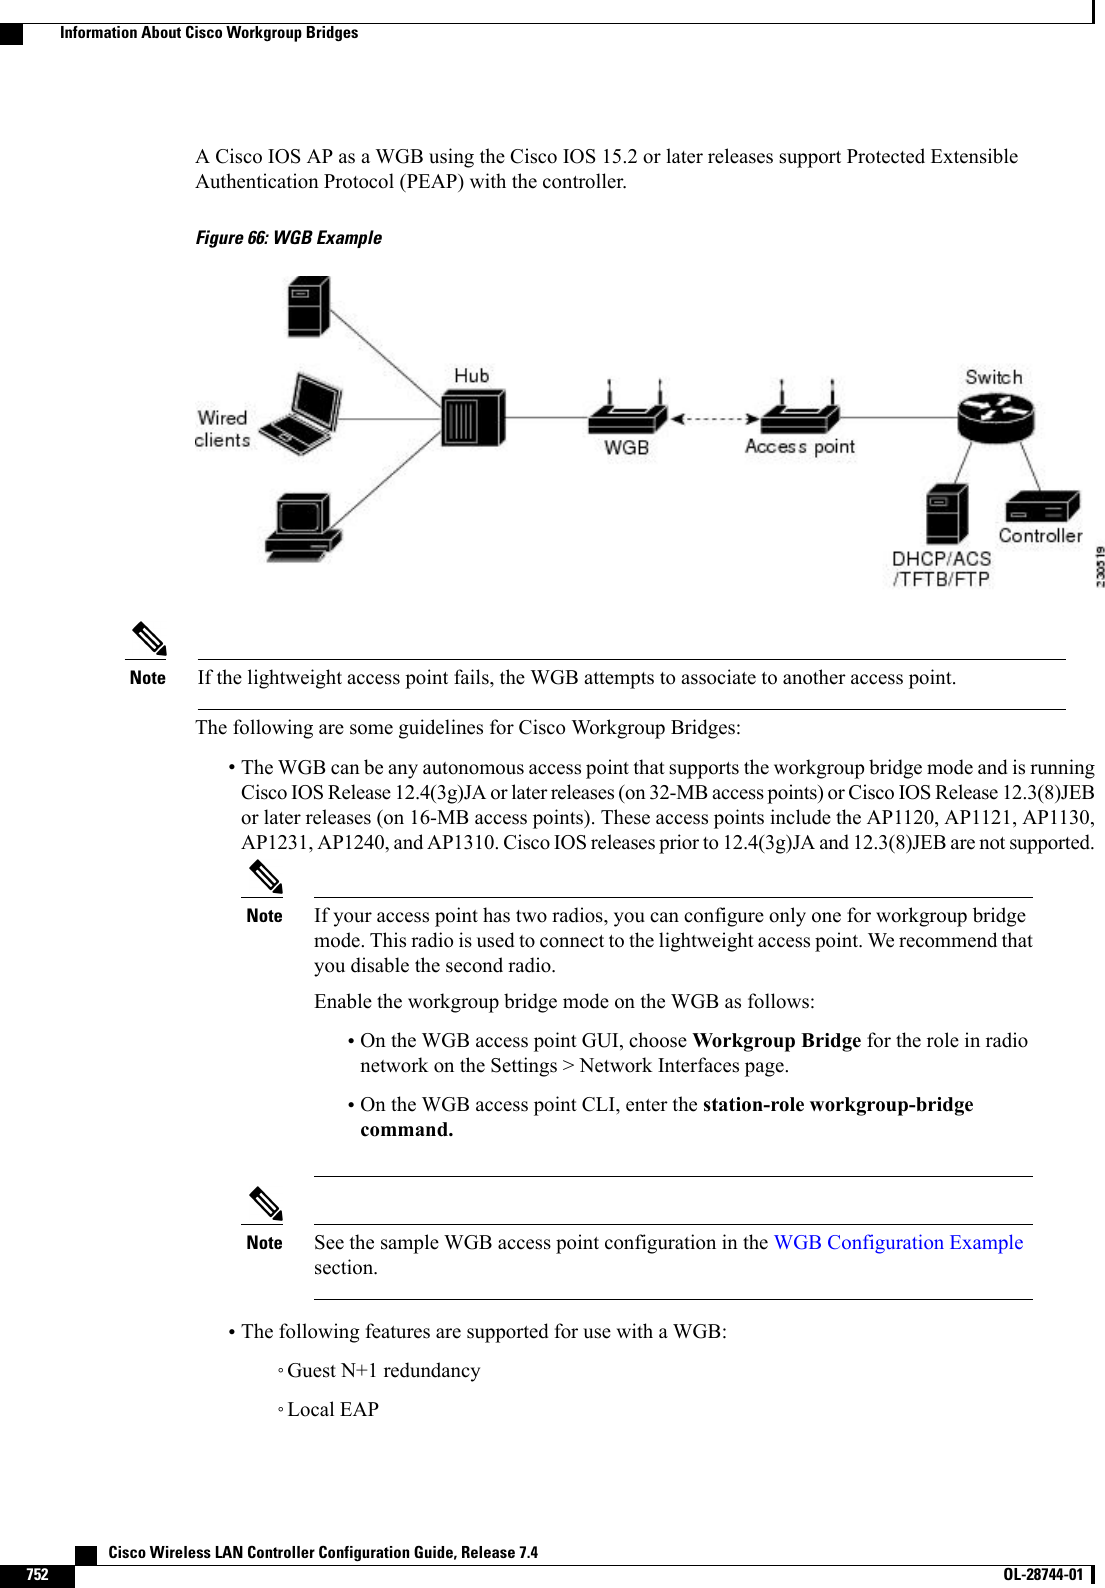 A Cisco IOS AP as a WGB using the Cisco IOS 15.2 or later releases support Protected ExtensibleAuthentication Protocol (PEAP) with the controller.Figure 66: WGB ExampleIf the lightweight access point fails, the WGB attempts to associate to another access point.NoteThe following are some guidelines for Cisco Workgroup Bridges:•The WGB can be any autonomous access point that supports the workgroup bridge mode and is runningCisco IOS Release 12.4(3g)JA or later releases (on 32-MB access points) or Cisco IOS Release 12.3(8)JEBor later releases (on 16-MB access points). These access points include the AP1120, AP1121, AP1130,AP1231, AP1240, and AP1310. Cisco IOS releases prior to 12.4(3g)JA and 12.3(8)JEB are not supported.If your access point has two radios, you can configure only one for workgroup bridgemode. This radio is used to connect to the lightweight access point. We recommend thatyou disable the second radio.Enable the workgroup bridge mode on the WGB as follows:Note•On the WGB access point GUI, choose Workgroup Bridge for the role in radionetwork on the Settings &gt; Network Interfaces page.•On the WGB access point CLI, enter the station-role workgroup-bridgecommand.See the sample WGB access point configuration in the WGB Configuration Examplesection.Note•The following features are supported for use with a WGB:◦Guest N+1 redundancy◦Local EAP   Cisco Wireless LAN Controller Configuration Guide, Release 7.4752 OL-28744-01  Information About Cisco Workgroup Bridges